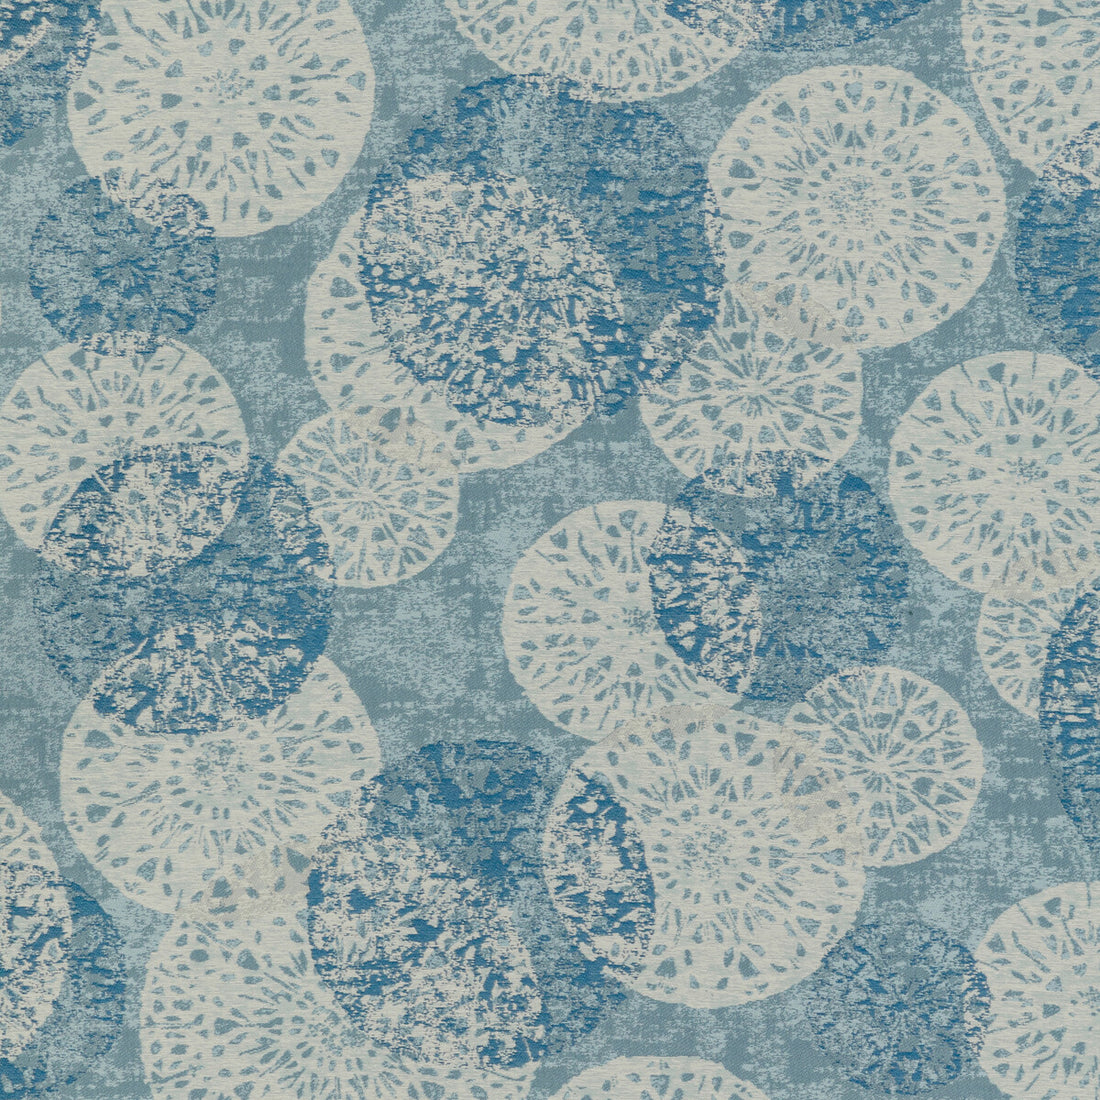 Ringsend fabric in water color - pattern 36059.15.0 - by Kravet Basics in the Monterey collection